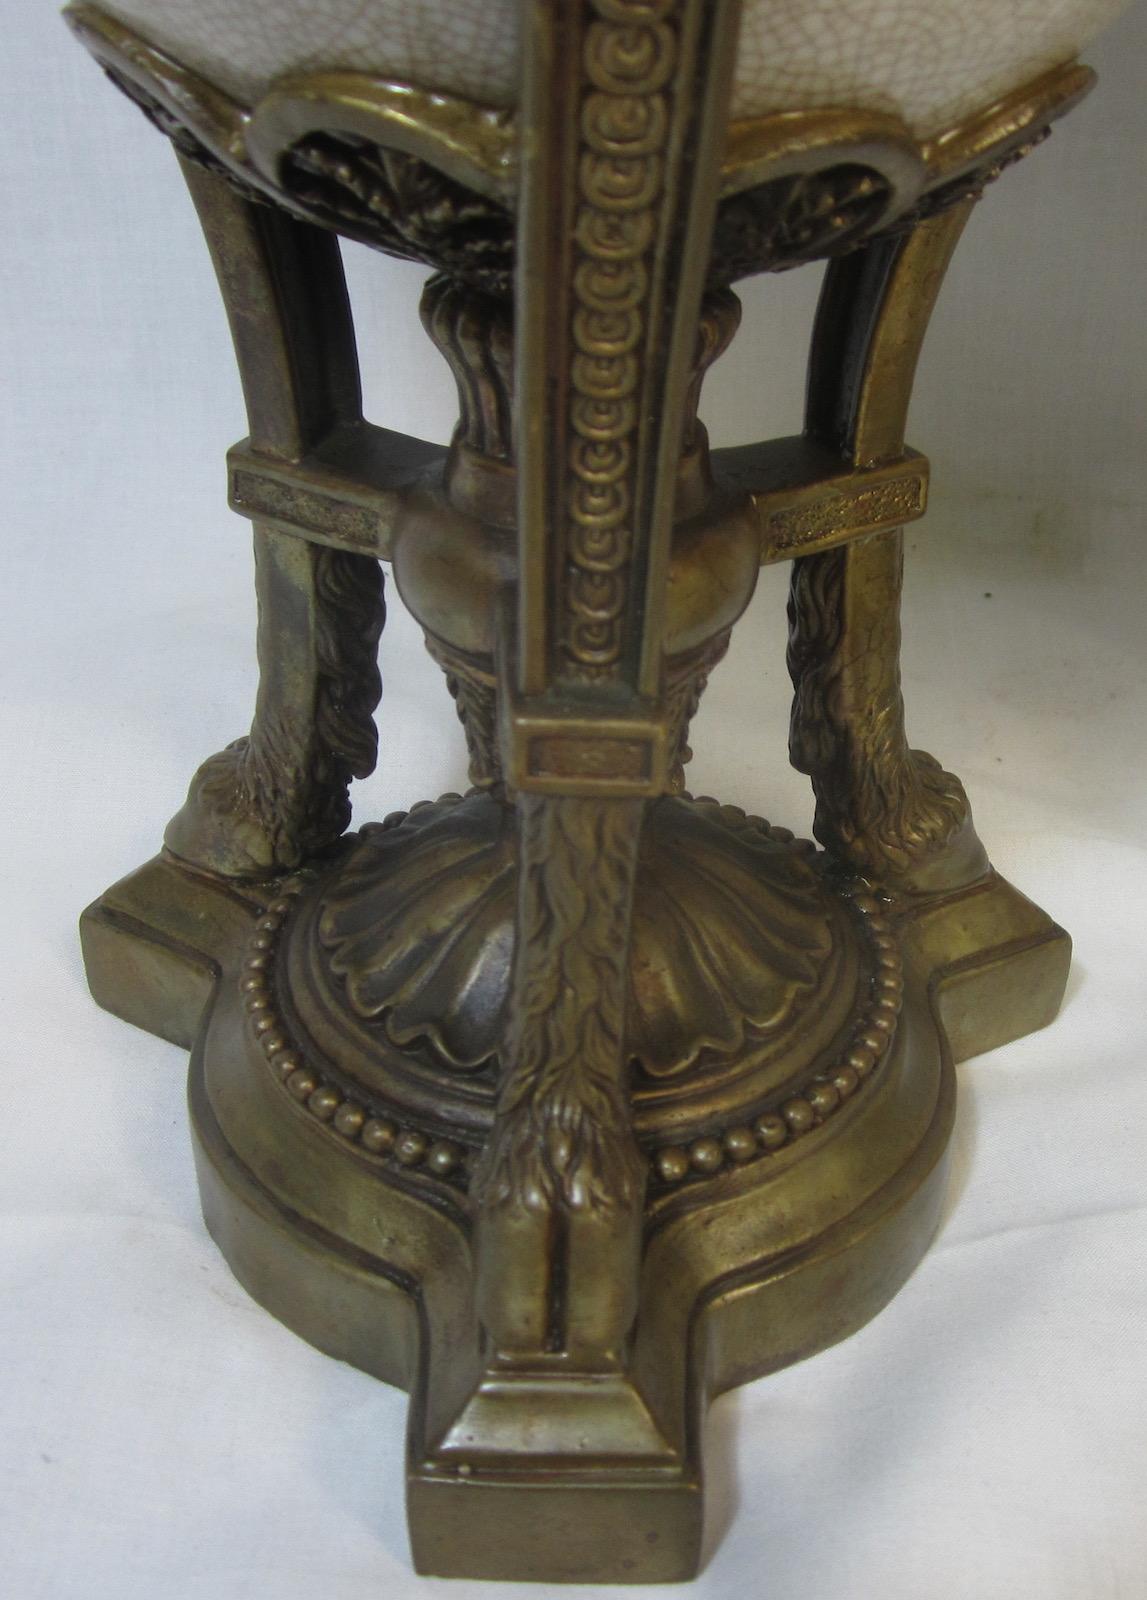 Late 19th Century French Ceramic and Ormolu Lidded Urn